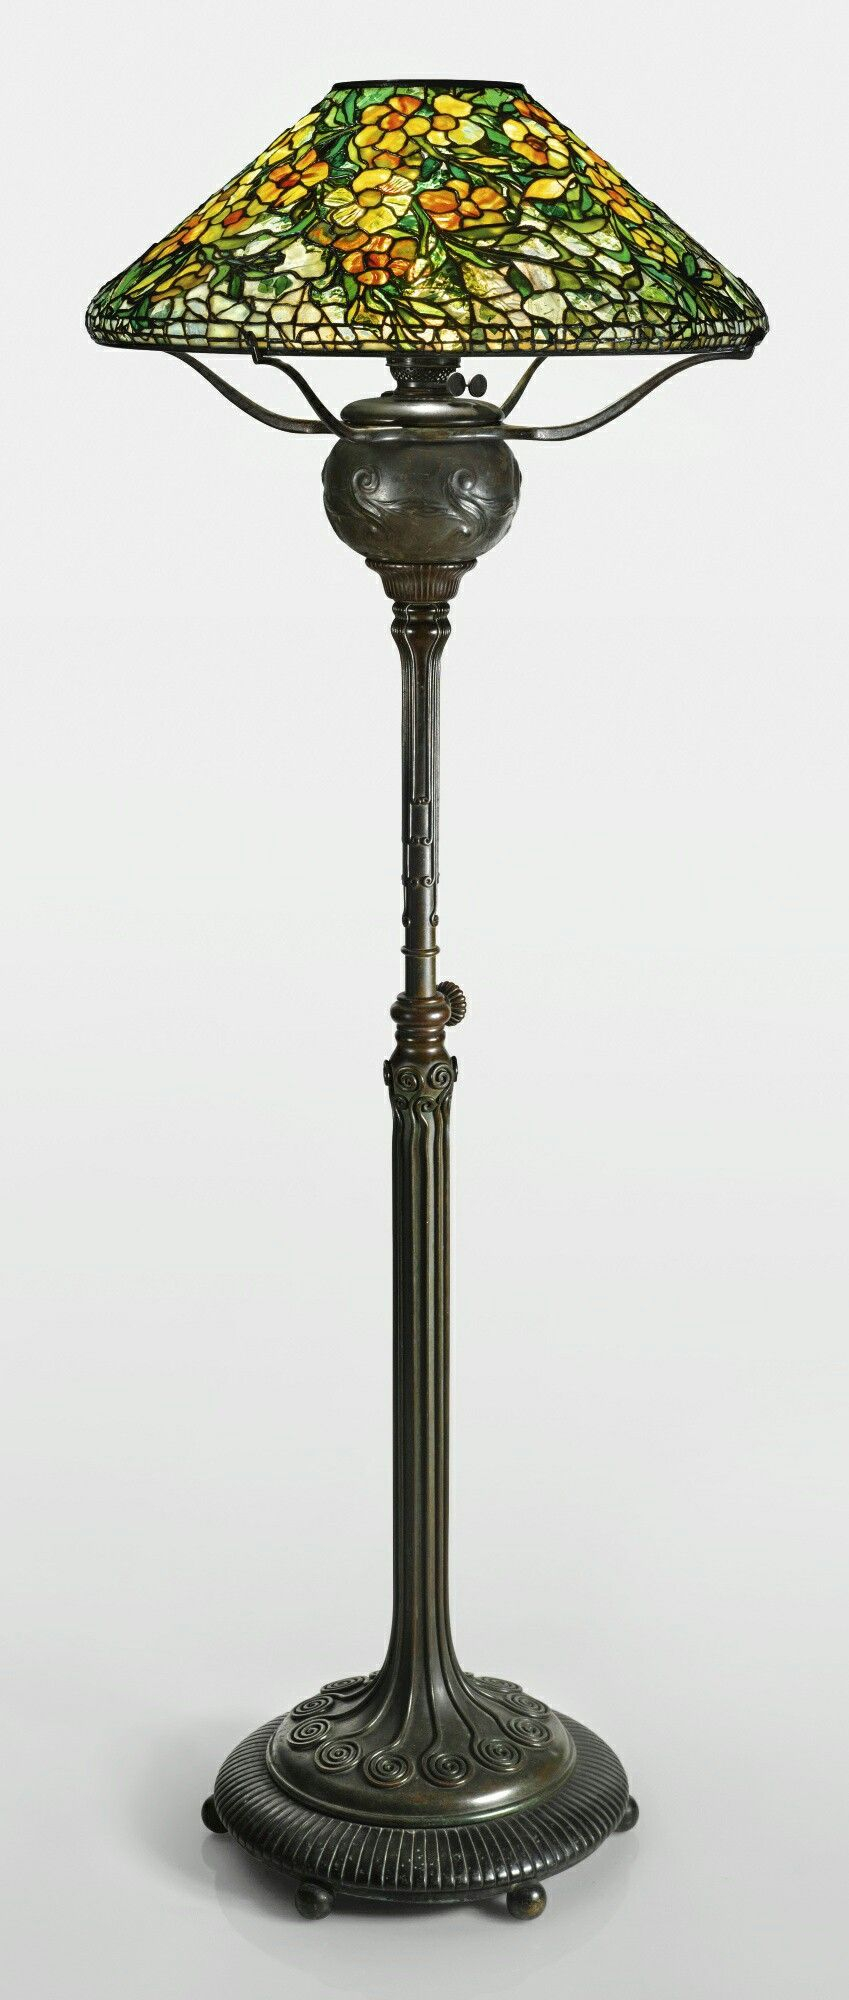 Tiffany Studios An Early And Rare Allamander Floor Lamp within size 849 X 2000